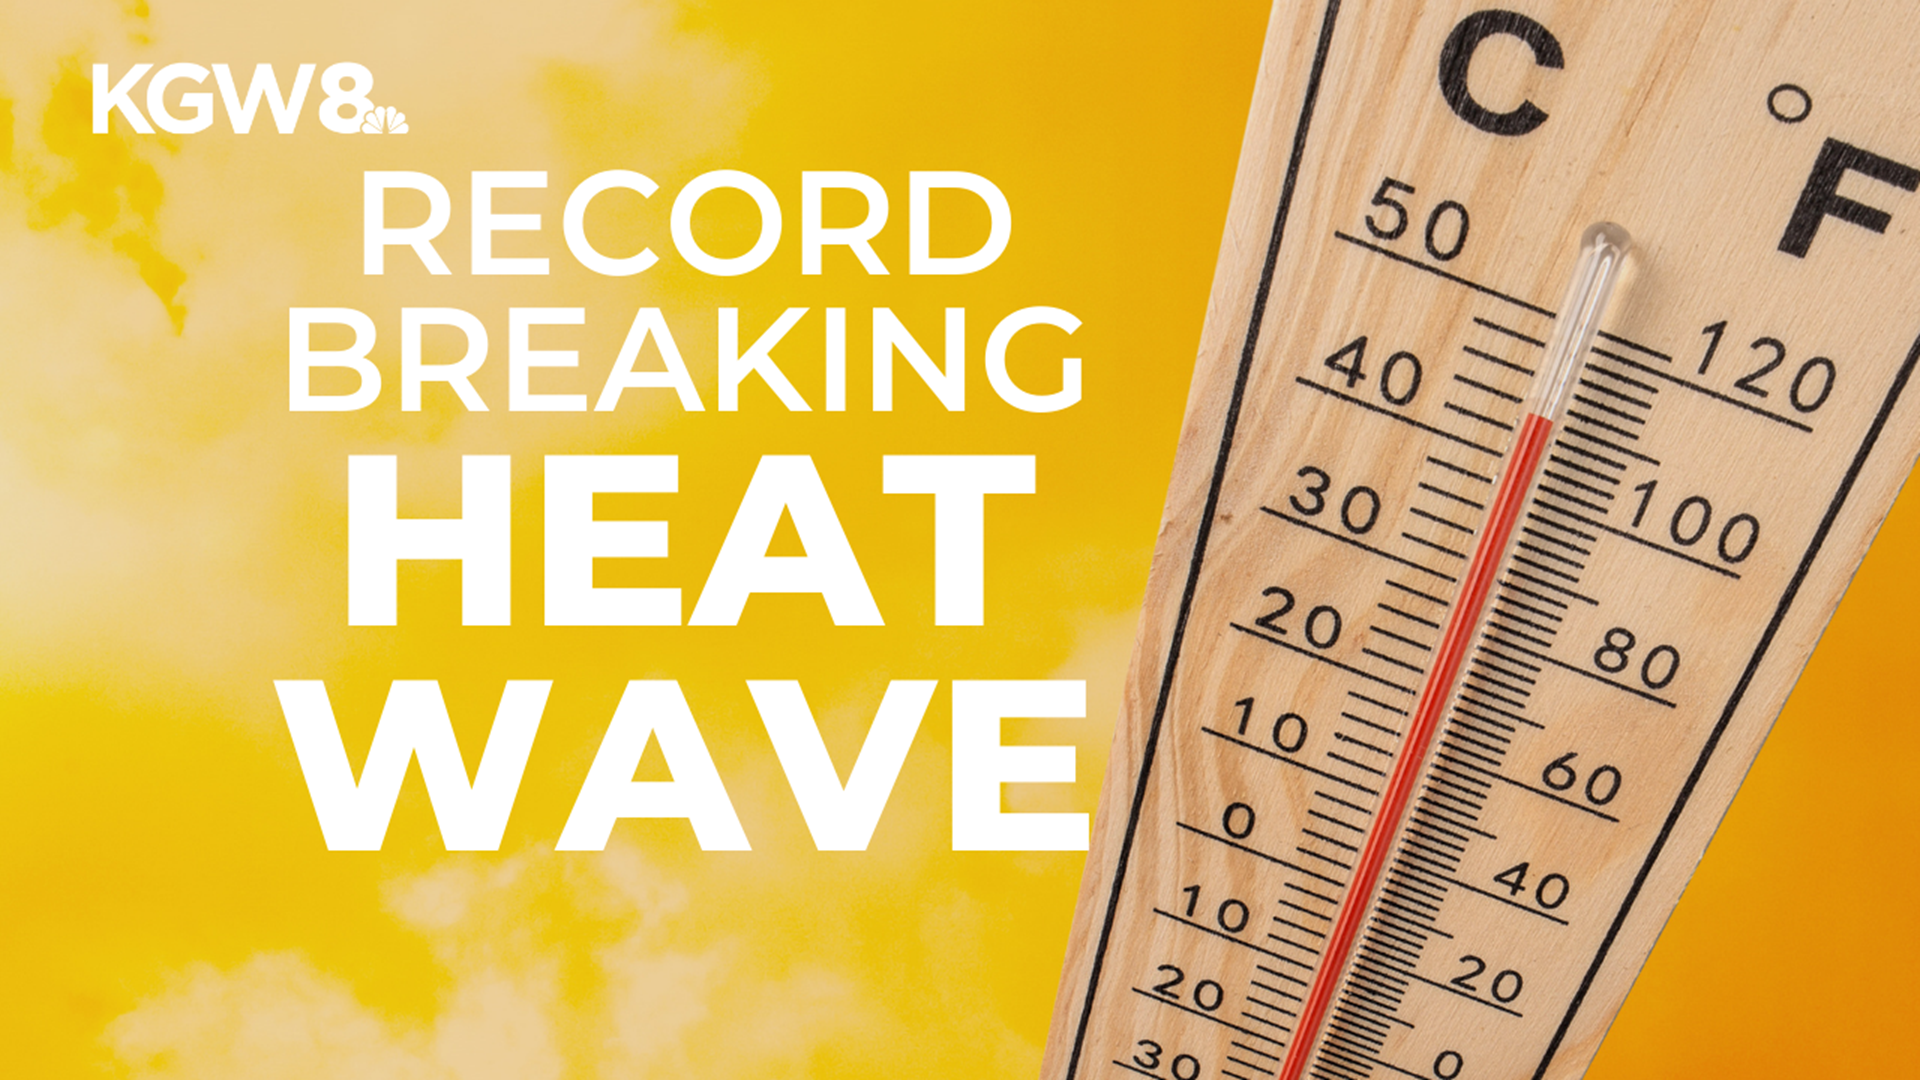 Heat stroke can develop in as quickly as a few hours. An expert shares the signs to watch out for during hot temperatures. Morgan Romero reports.